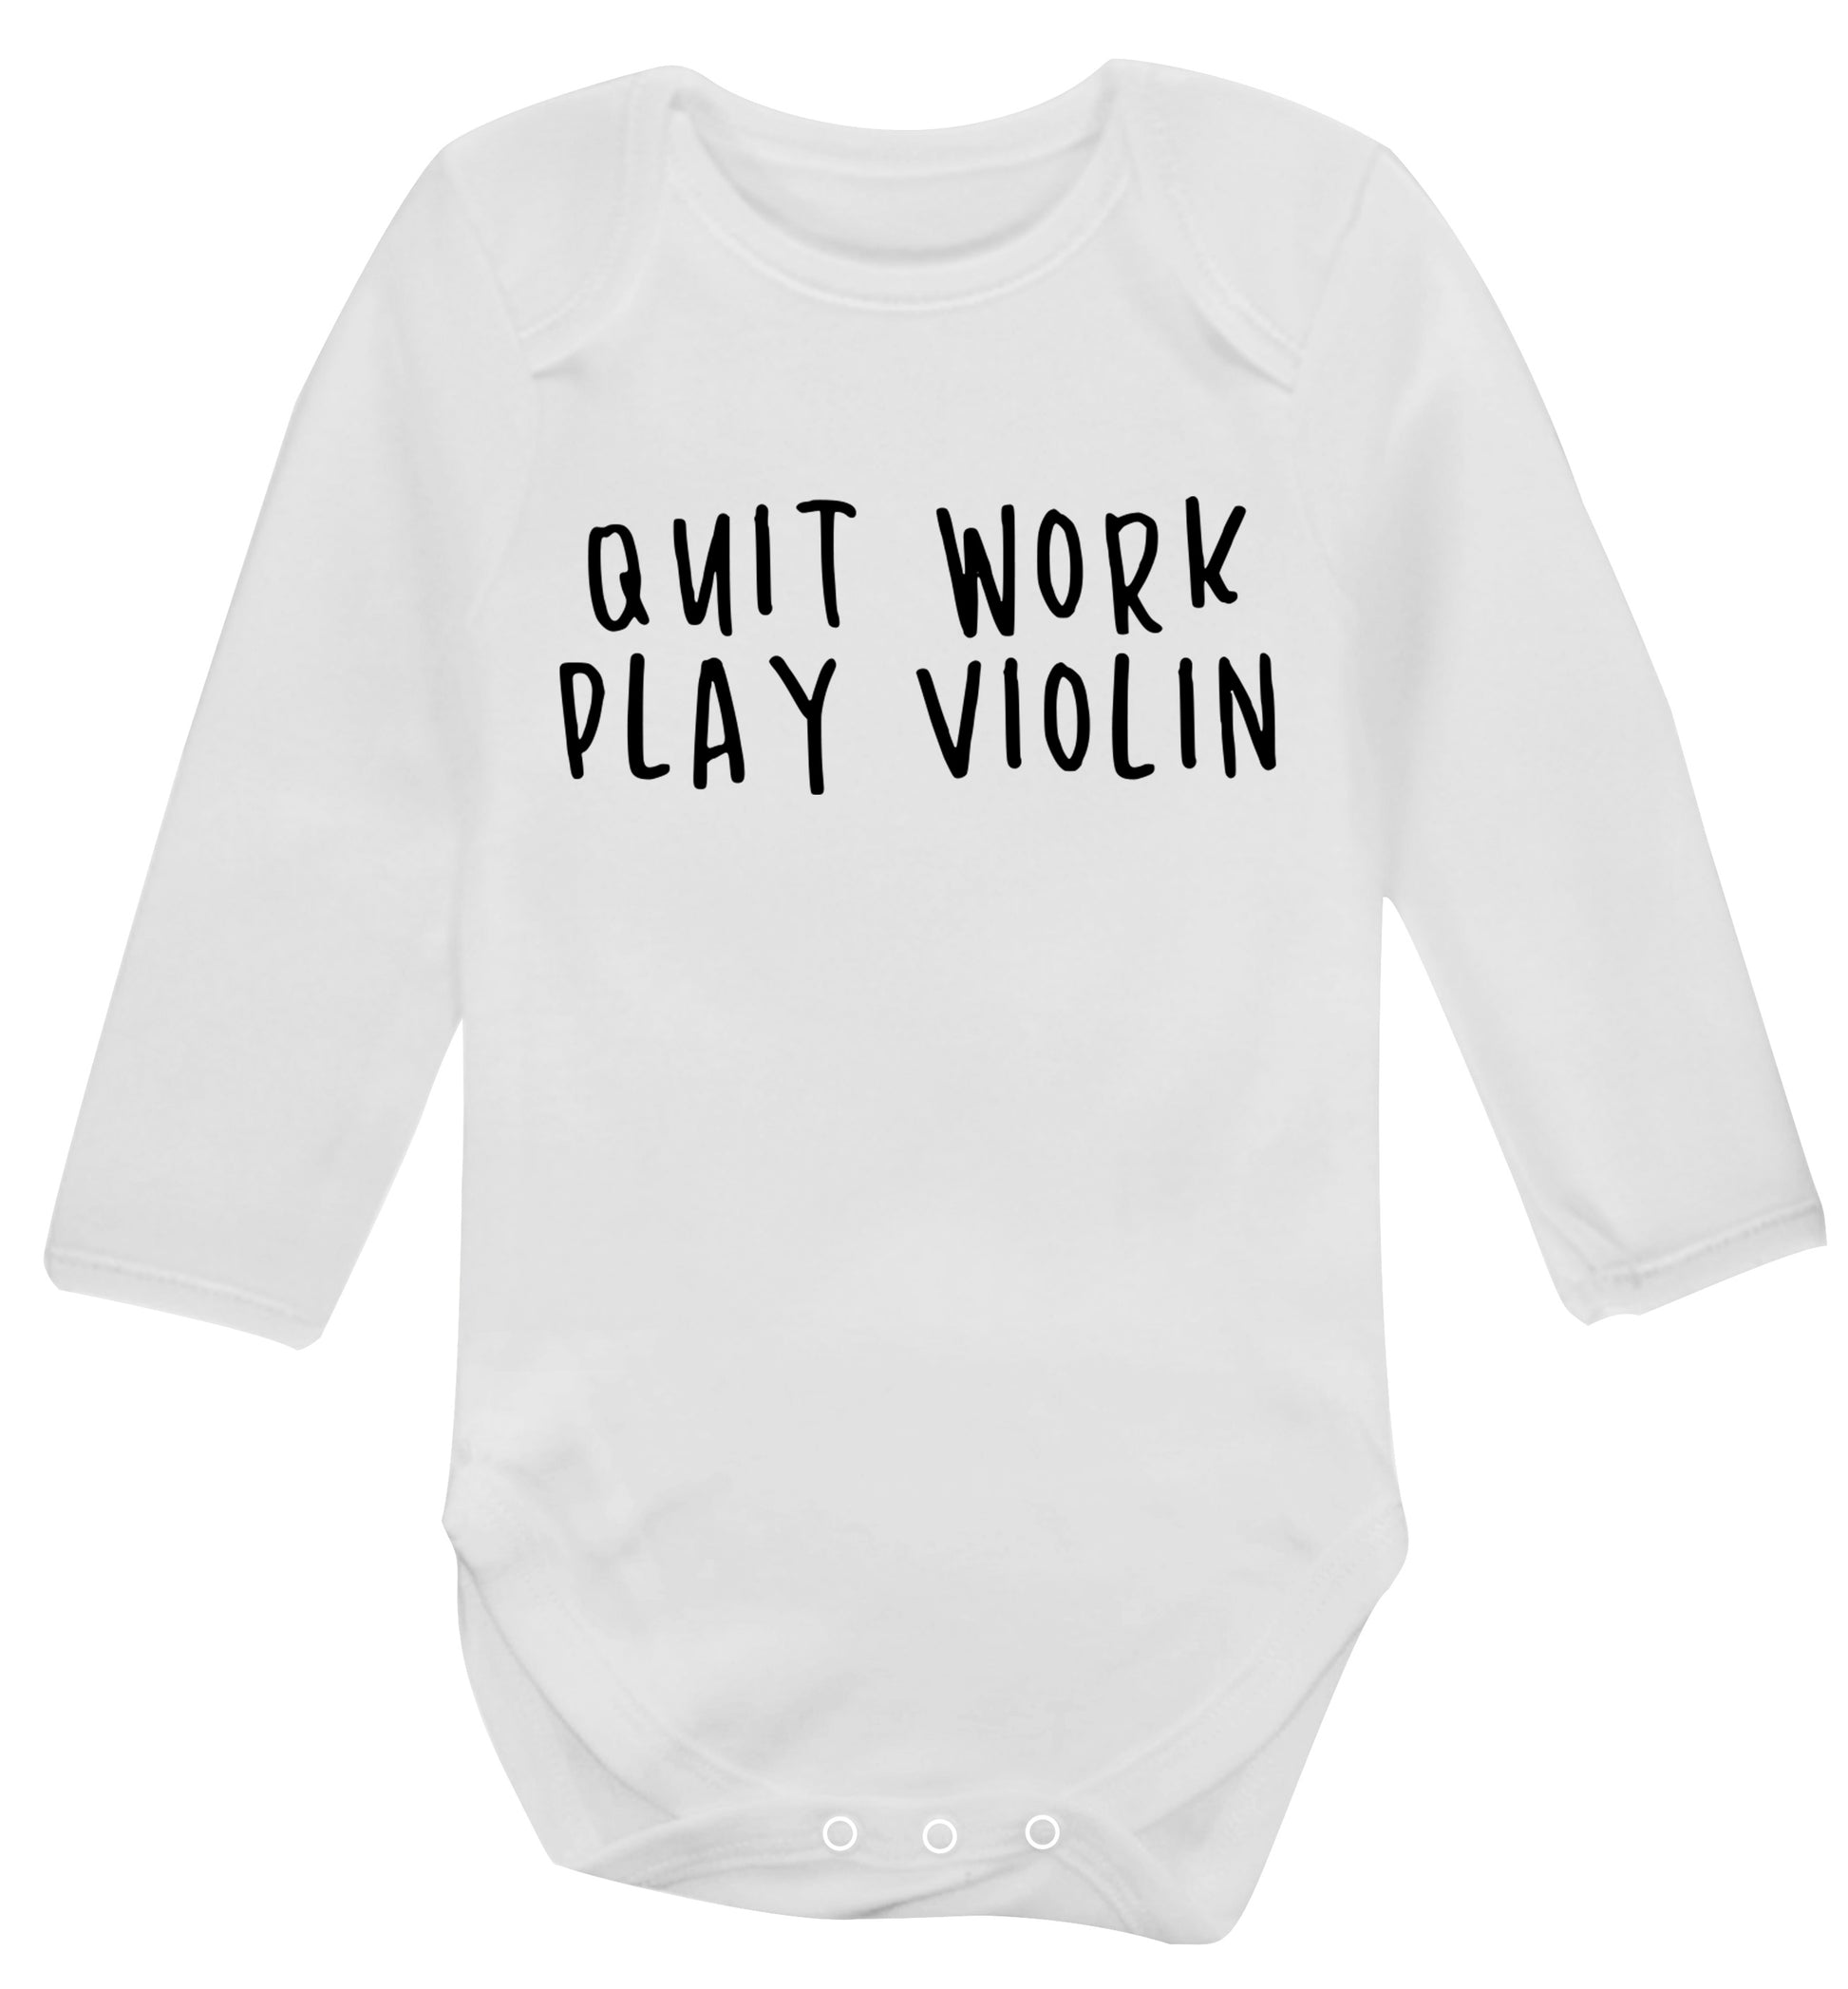 Quit work play violin Baby Vest long sleeved white 6-12 months